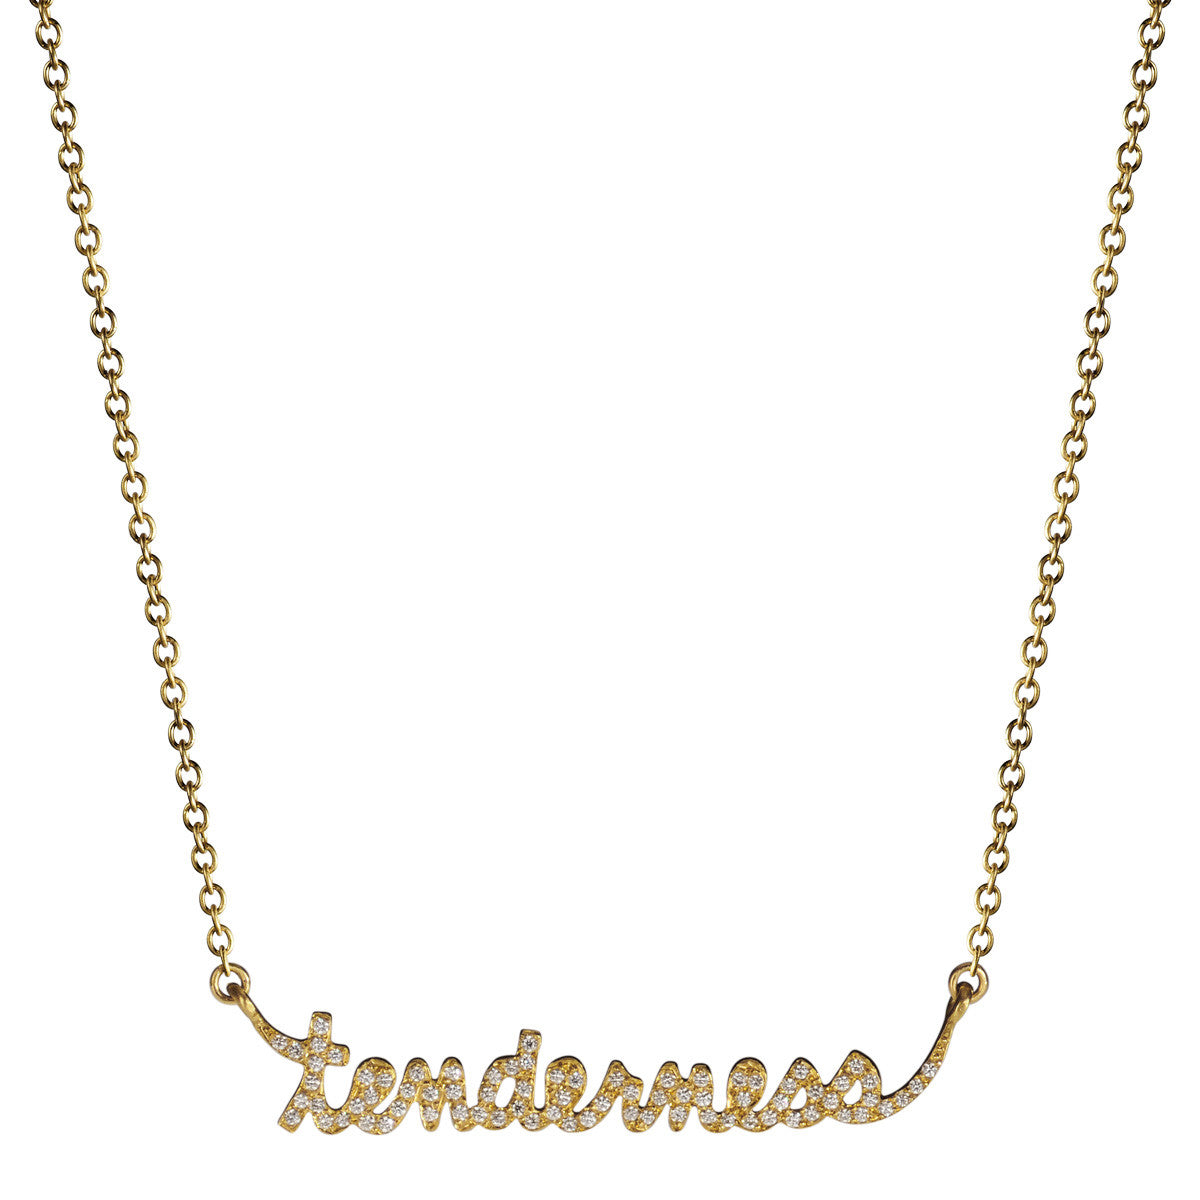 18K Gold Pave 'Tenderness' Pendant with Diamonds